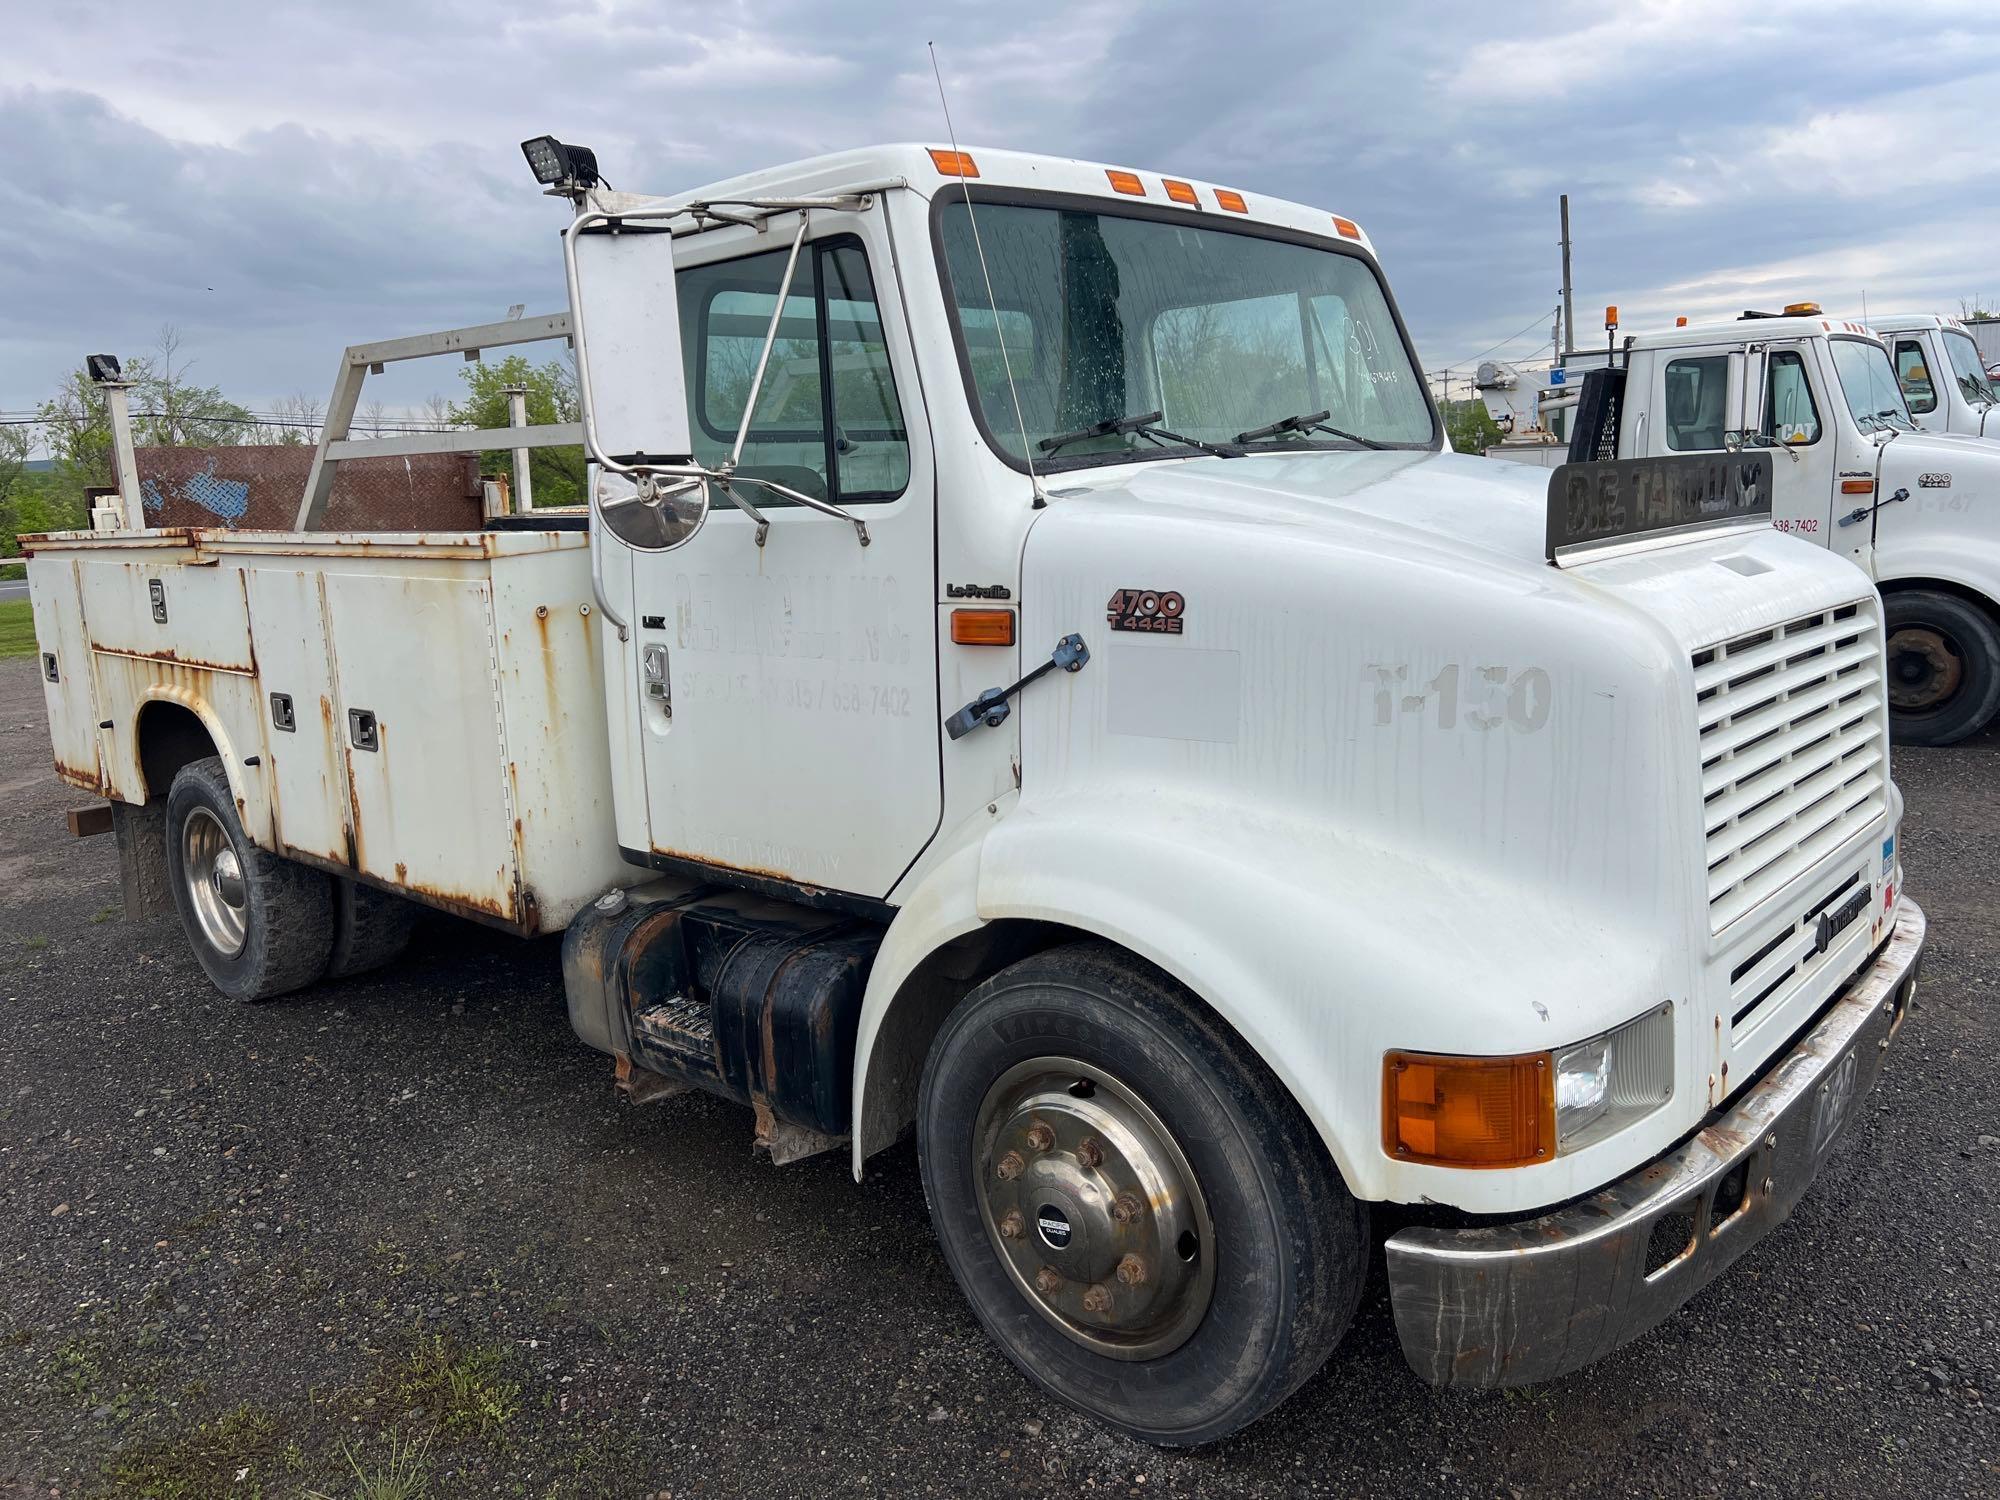 1999 INTERNATIONAL 4700 UTILITY TRUCK VN:1HTSMABM3XH674645 powered by T444E diesel engine, equipped